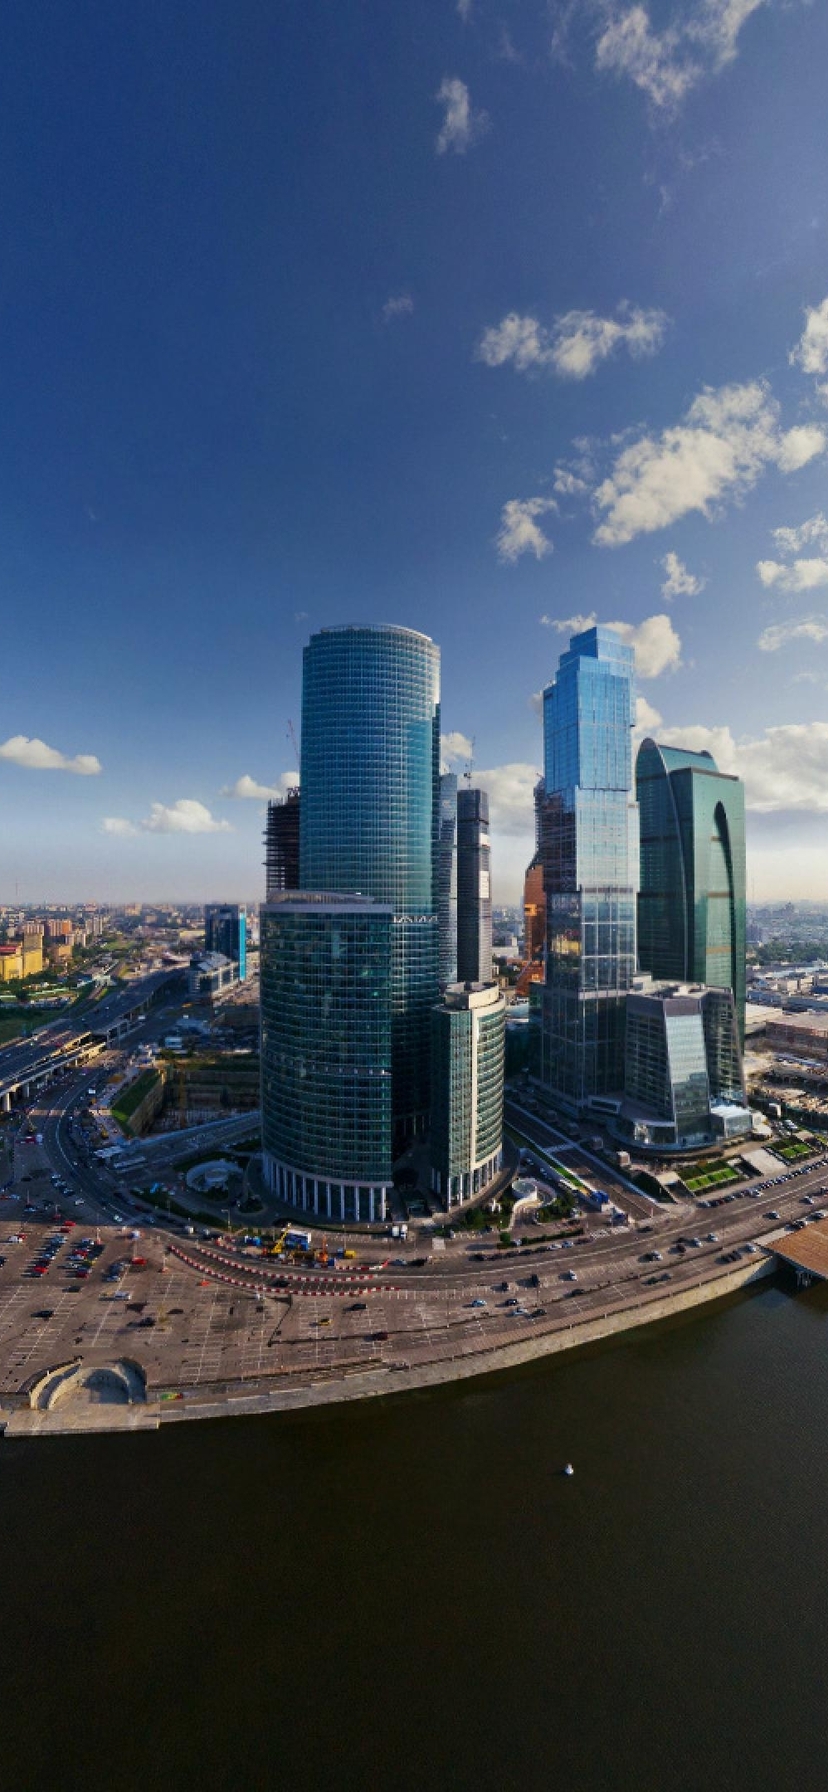 Image: Moscow, city, center, river, bridge, buildings, skyscrapers, sky, clouds, panorama